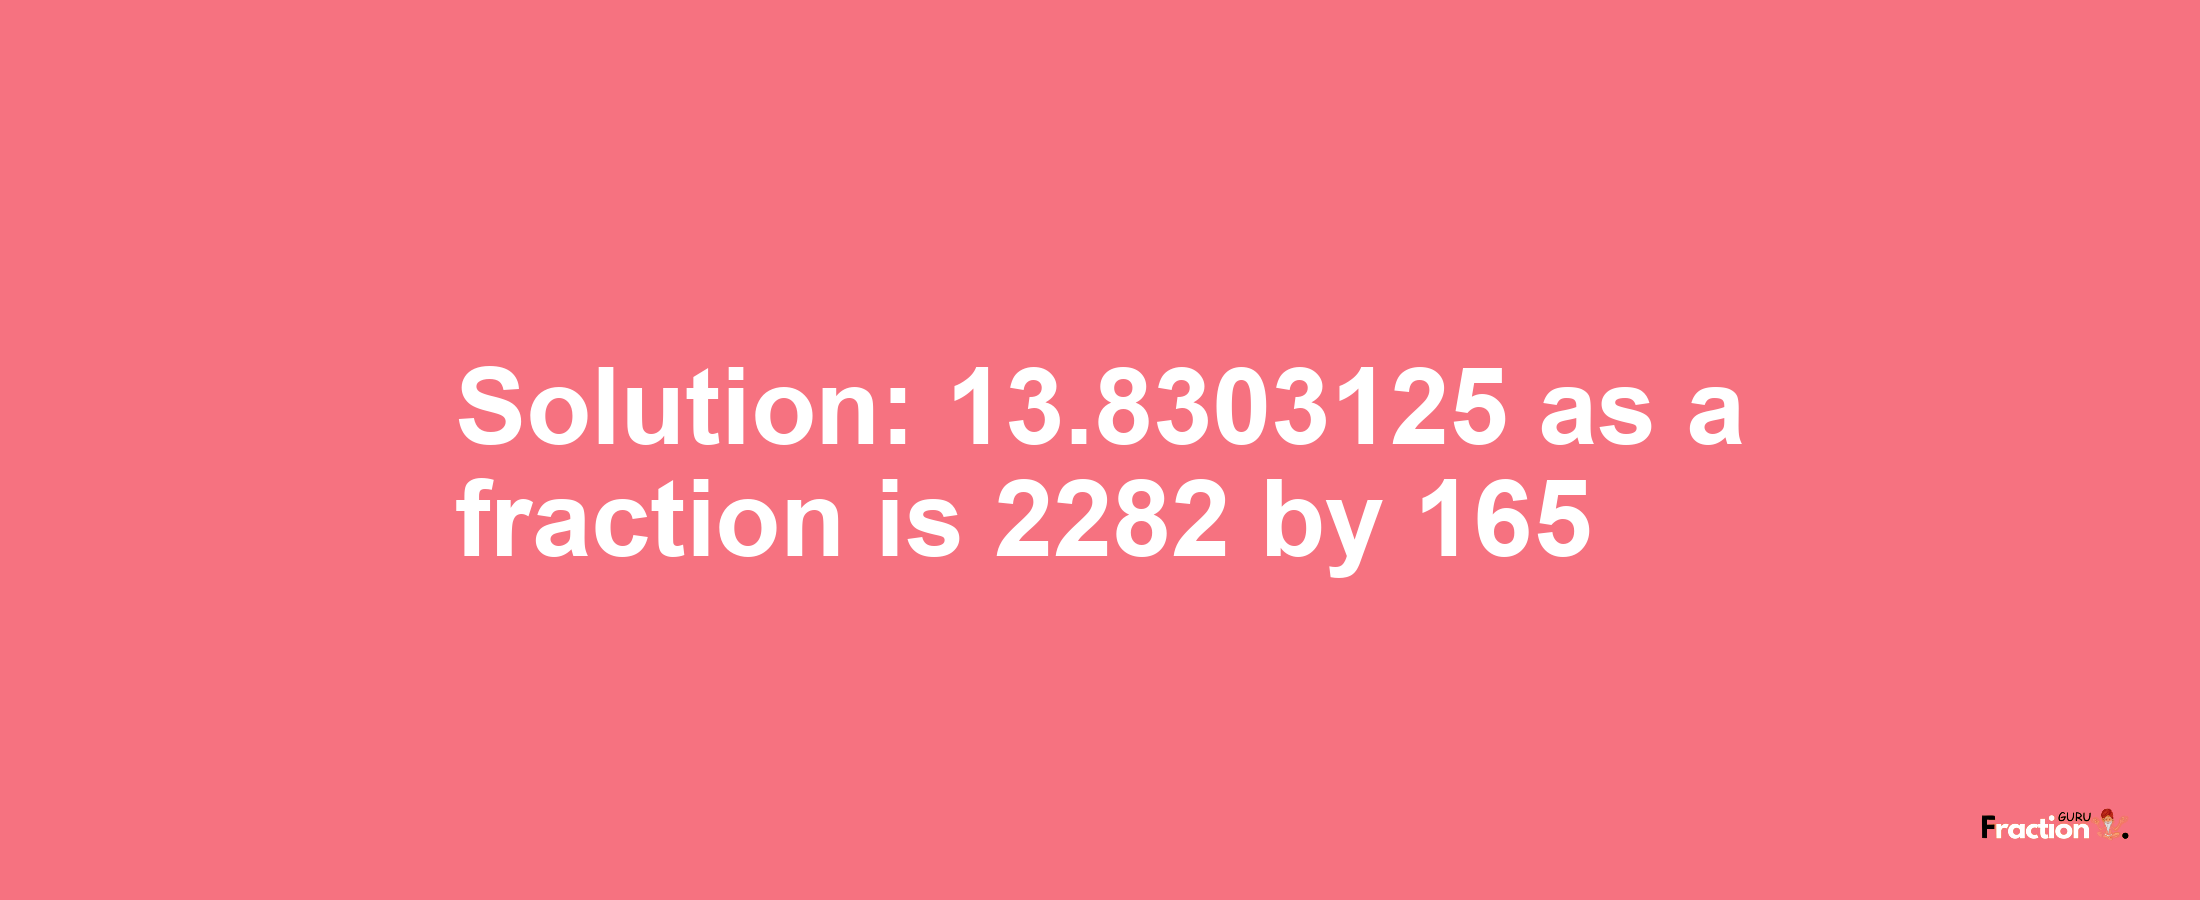 Solution:13.8303125 as a fraction is 2282/165